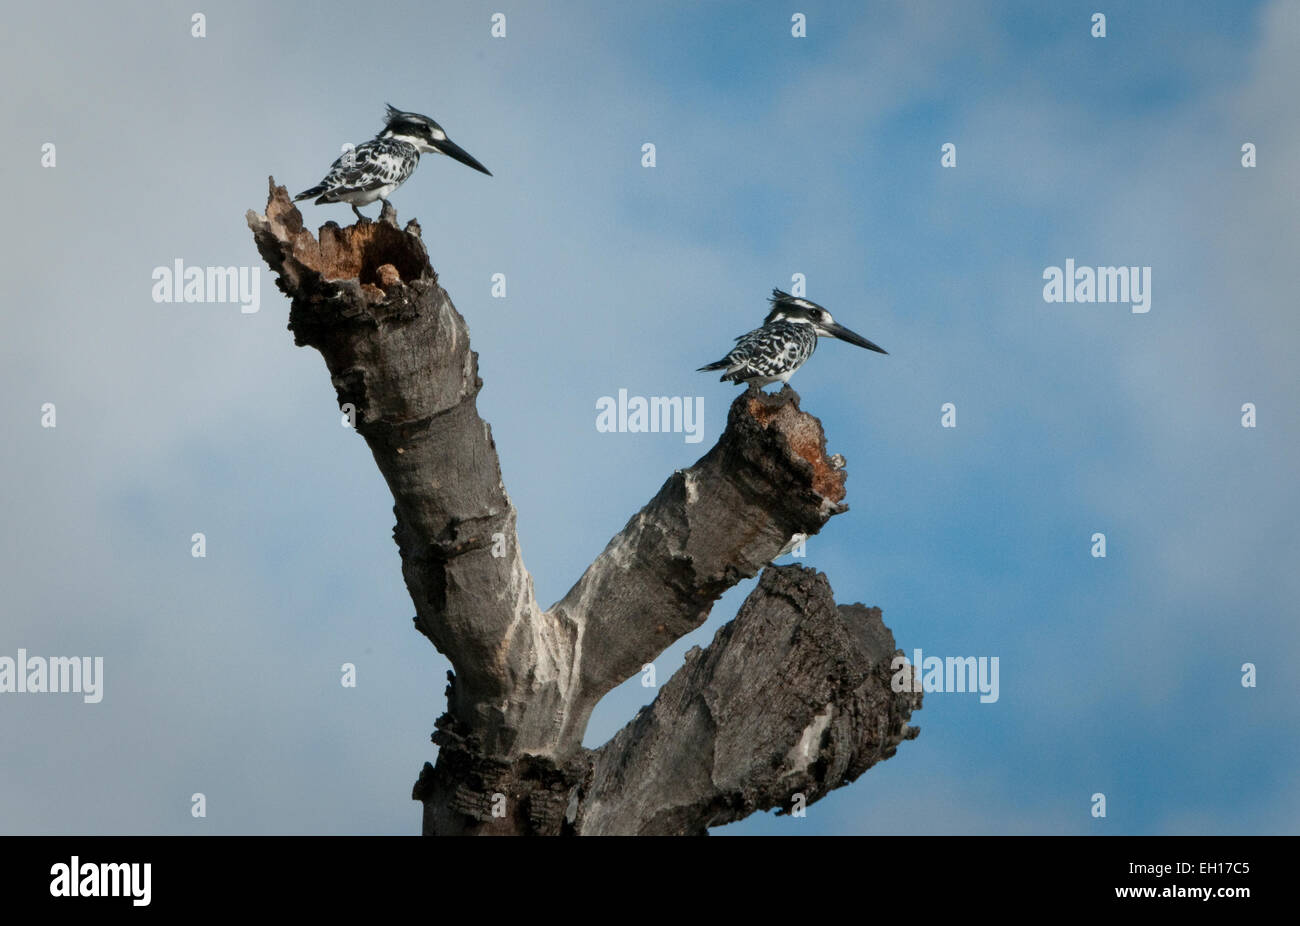 Two Pied Kingfishers perched on dead branches of tree Stock Photo